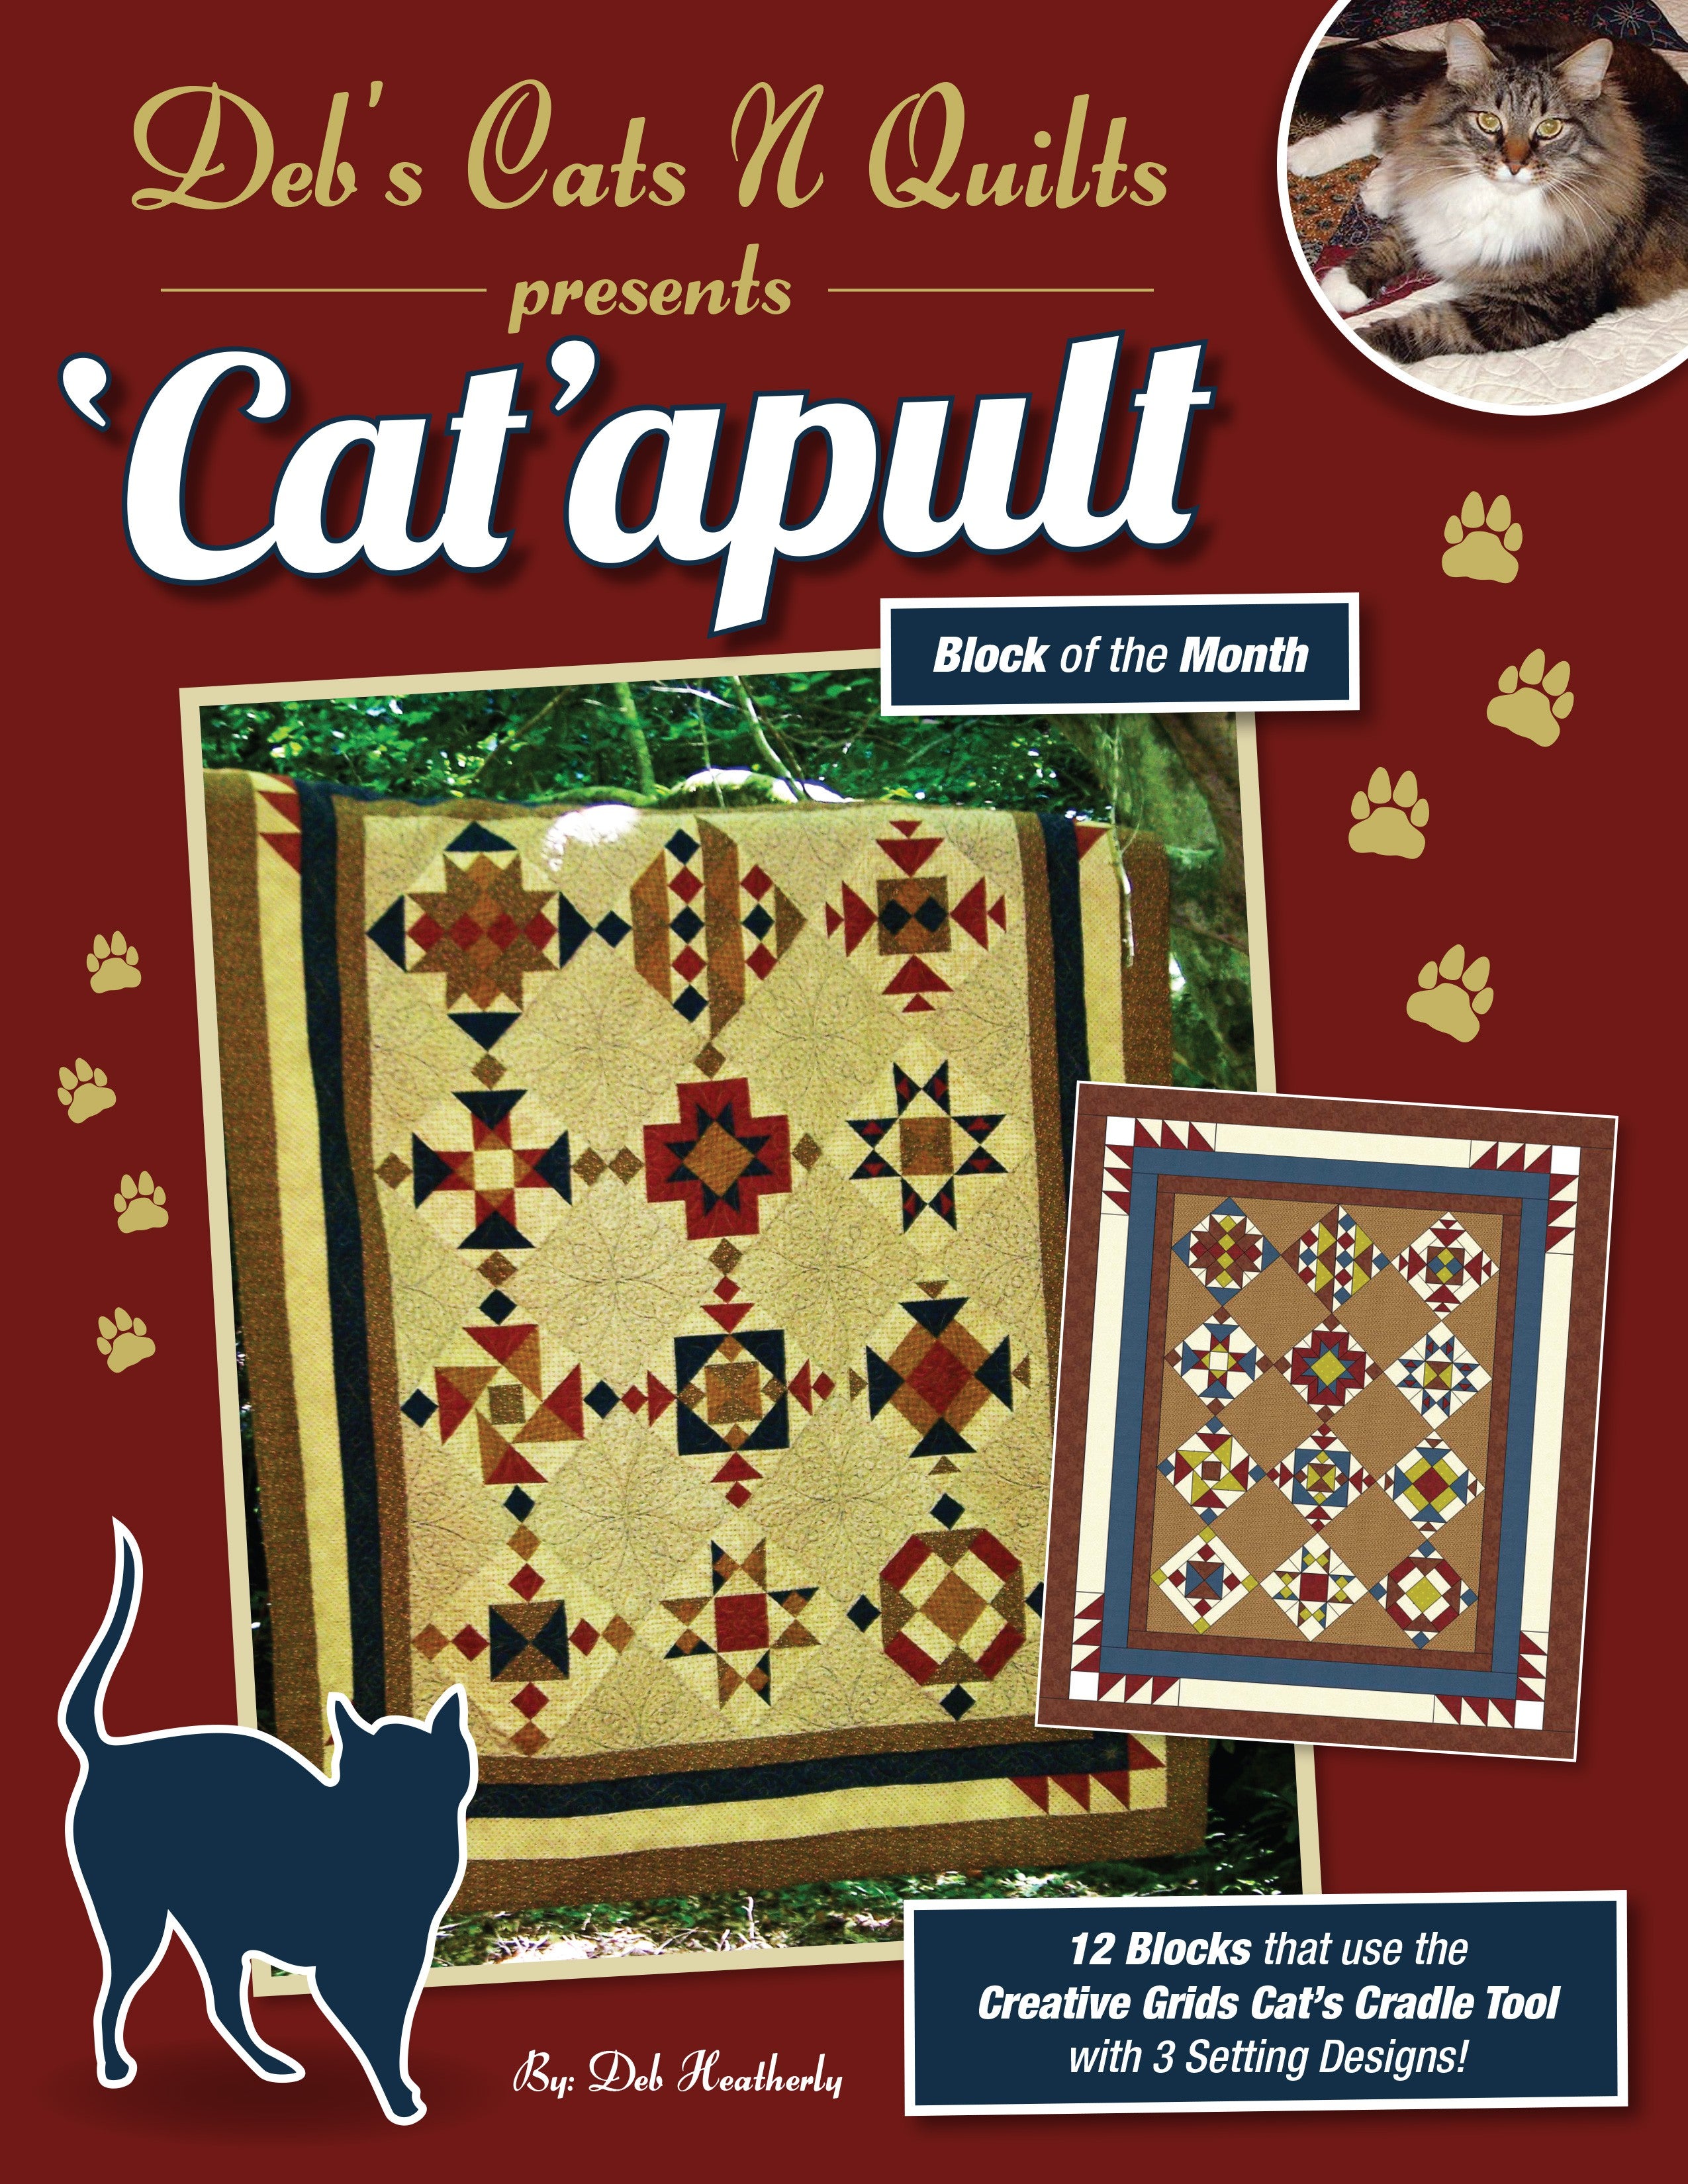 Catapult Block of the Month Quilt Pattern by Deb Heatherly of Deb's Cats N Quilts